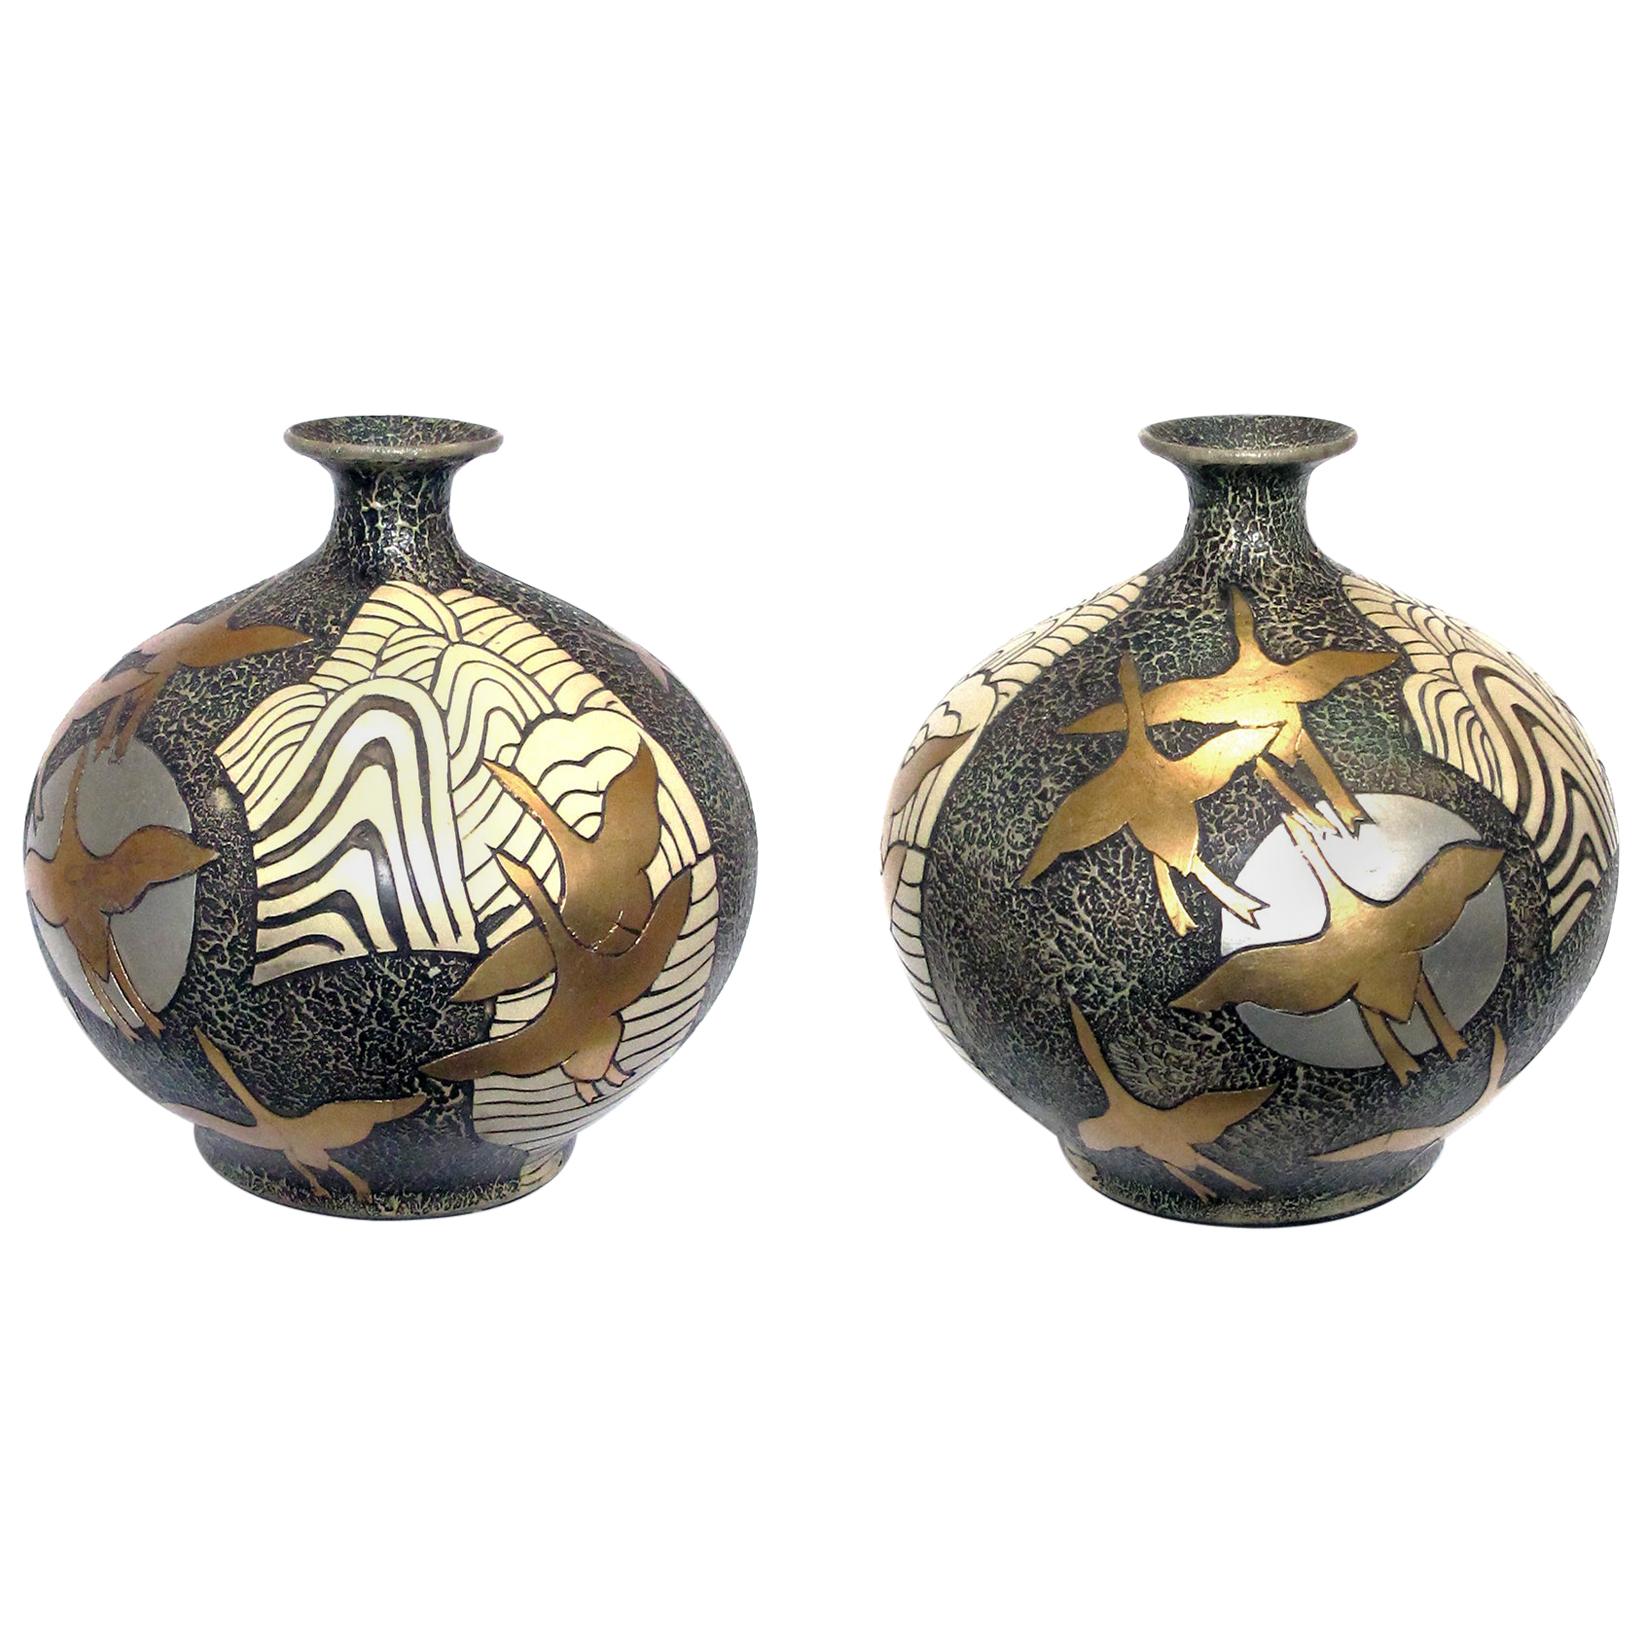 Large Pair of Asian-Inspired 1960s Ceramic Vases Adorned with Stylized Birds